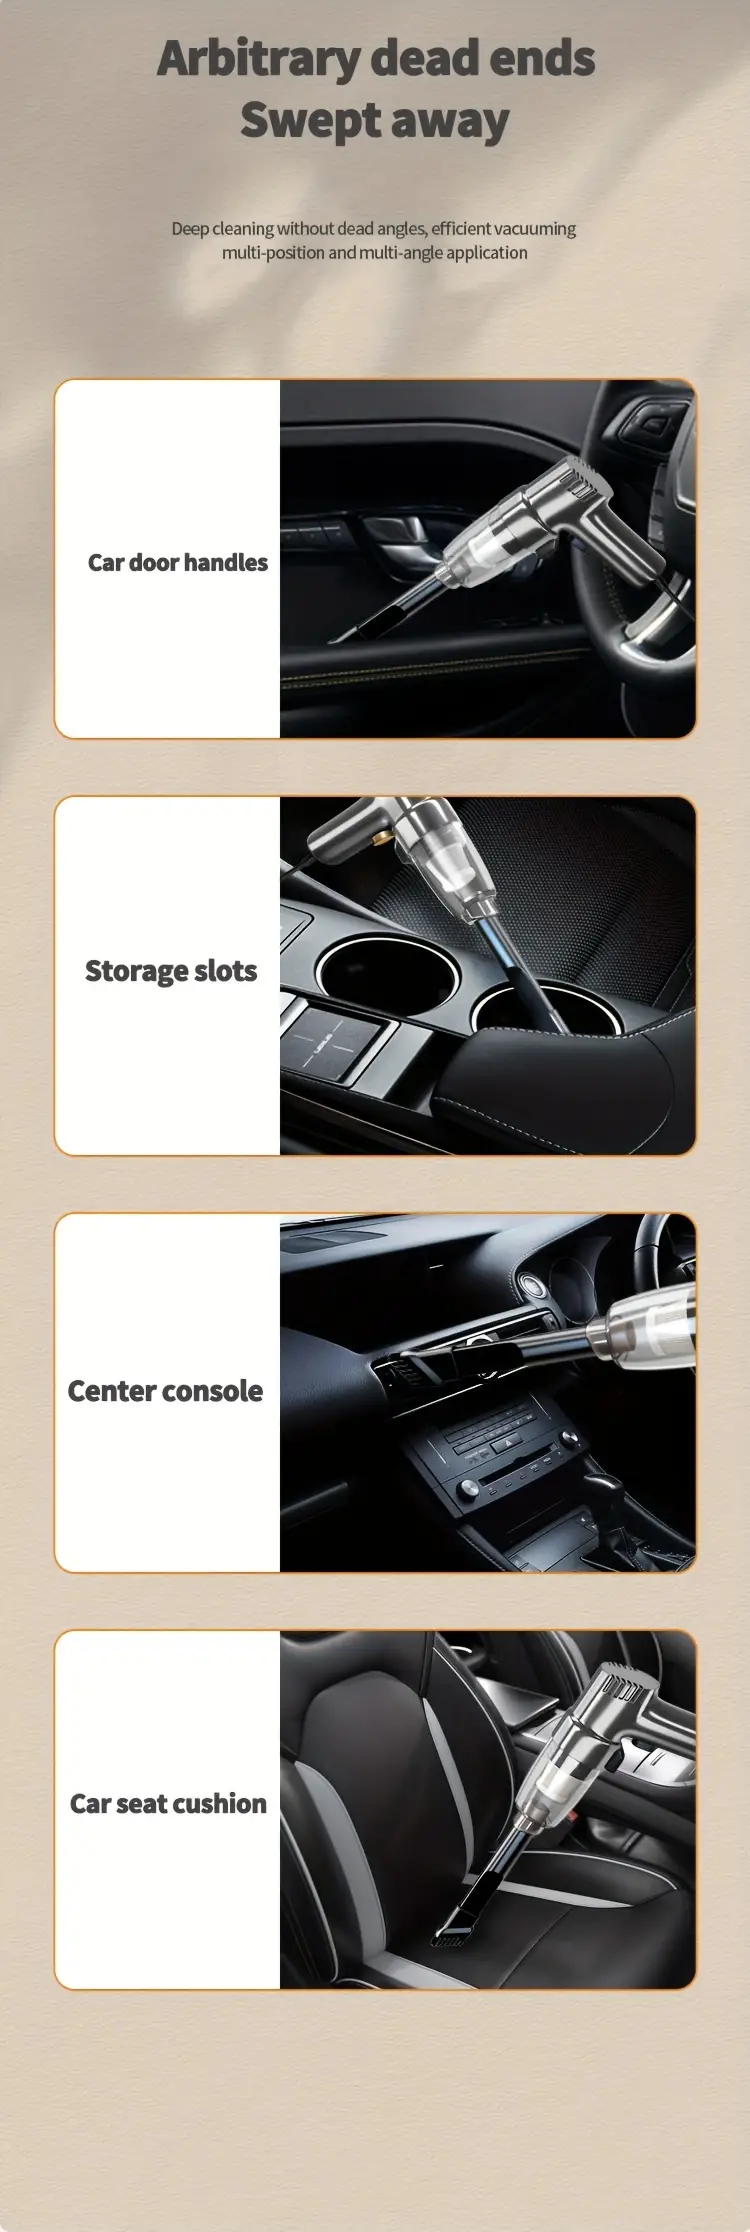 car mounted vacuum cleaner super strong high power high suction dual purpose sedan small mini handheld multi functional portable details 3